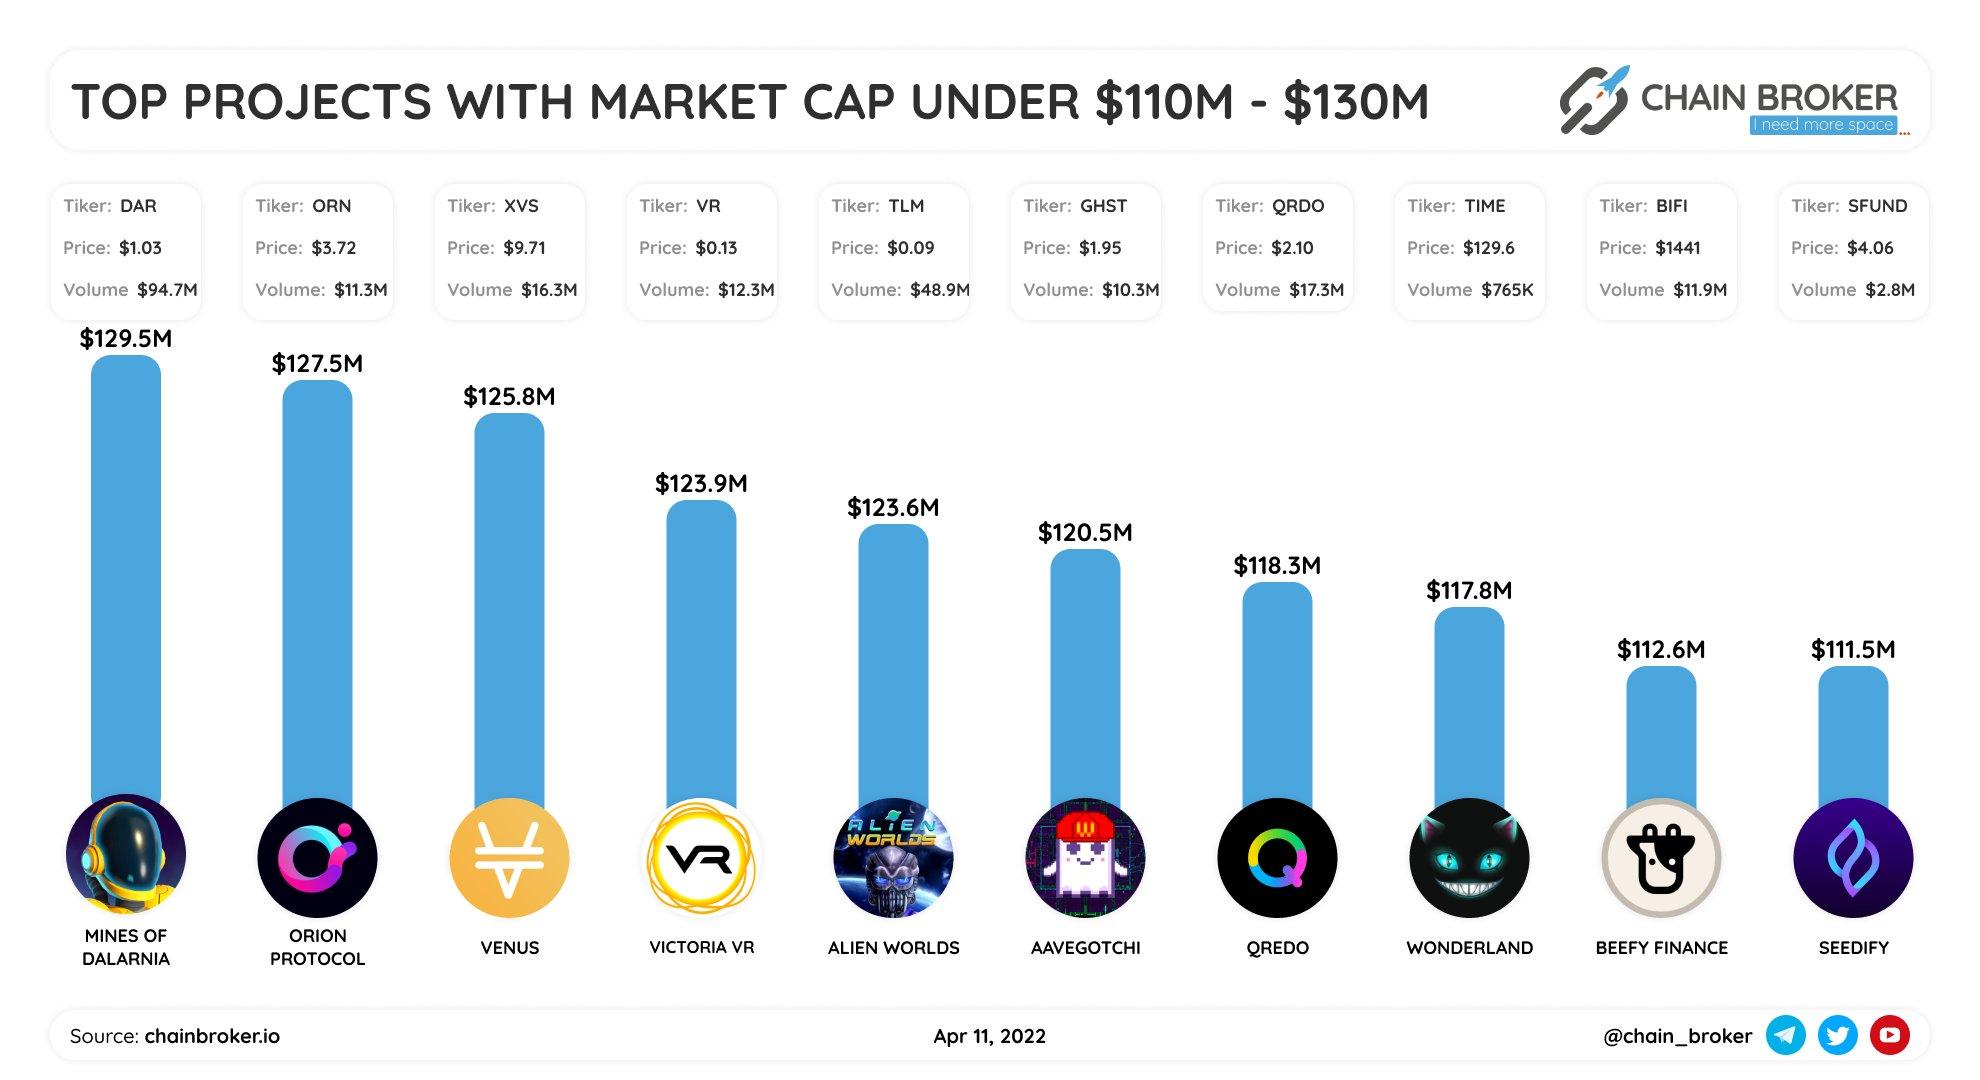 Top projects with market cap $110M - $130M